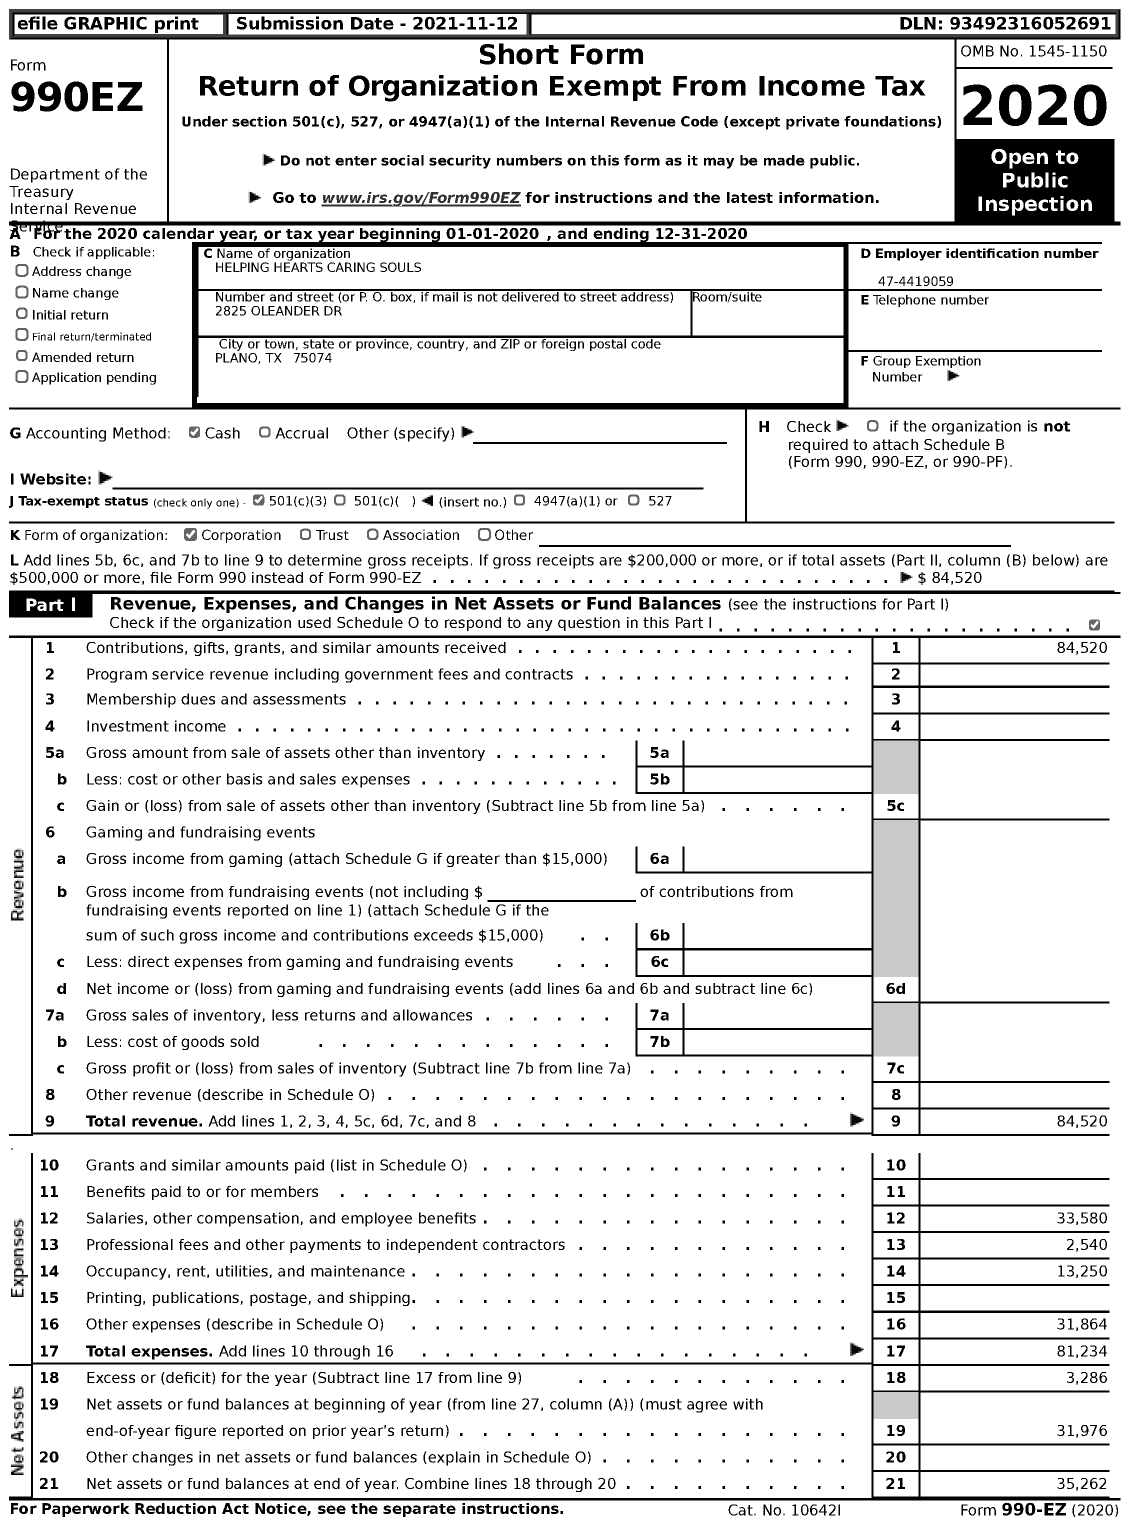 Image of first page of 2020 Form 990EZ for Helping Hearts Caring Souls